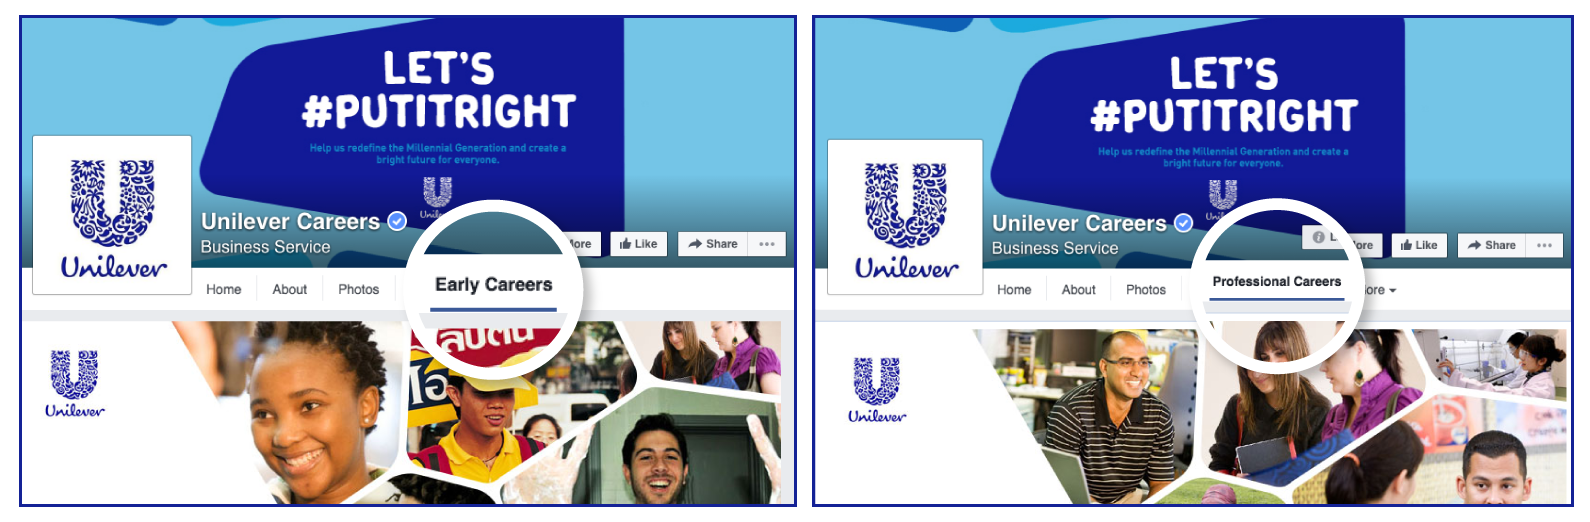 Unilever Facebook careers page